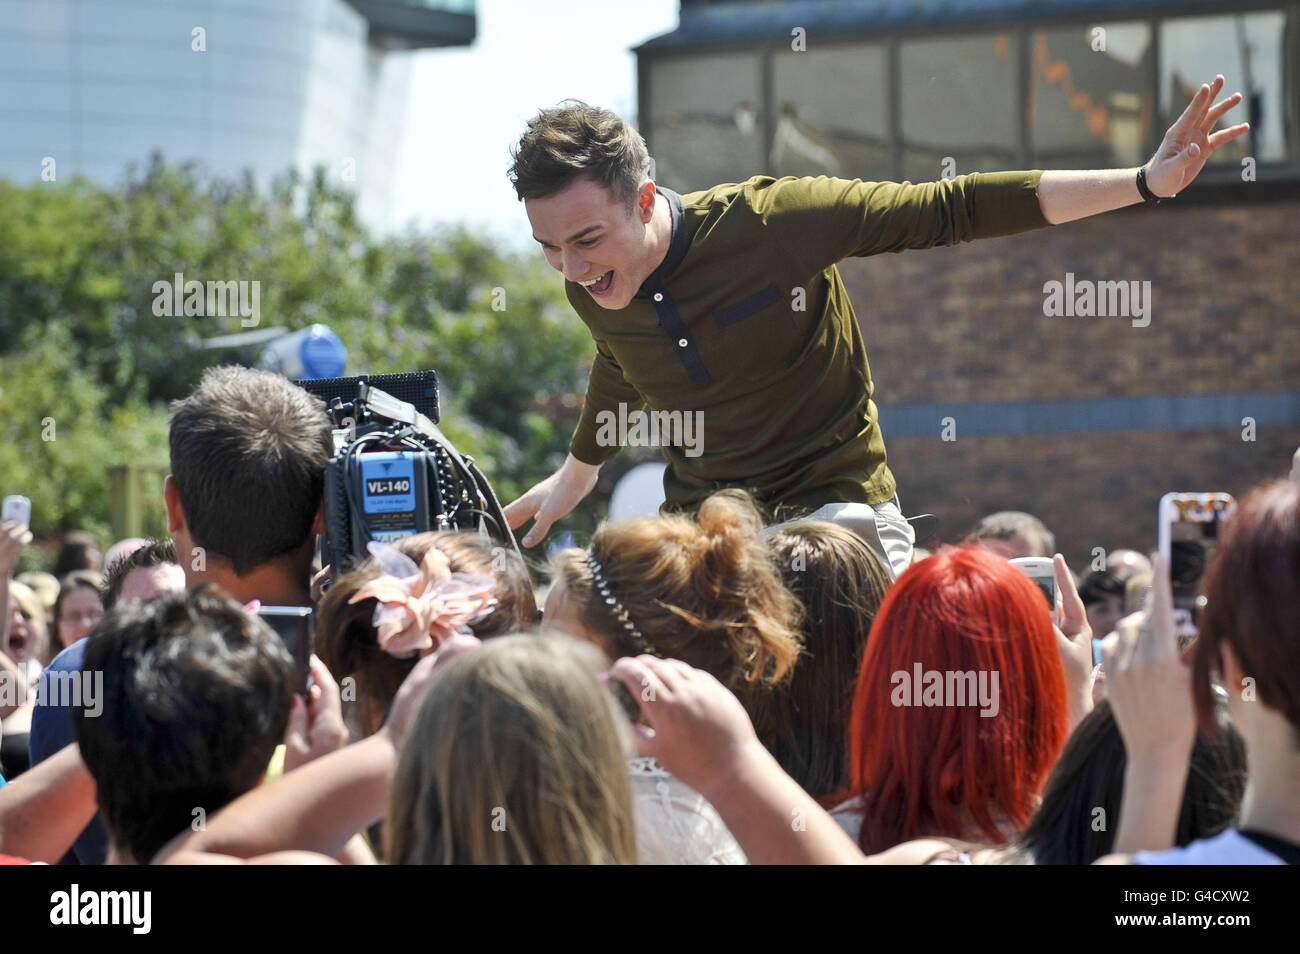 X Factor auditions - Cardiff. Xtra factor presenter Olly Murs in Cardiff, Wales, where X-Factor auditions are taking place. Stock Photo